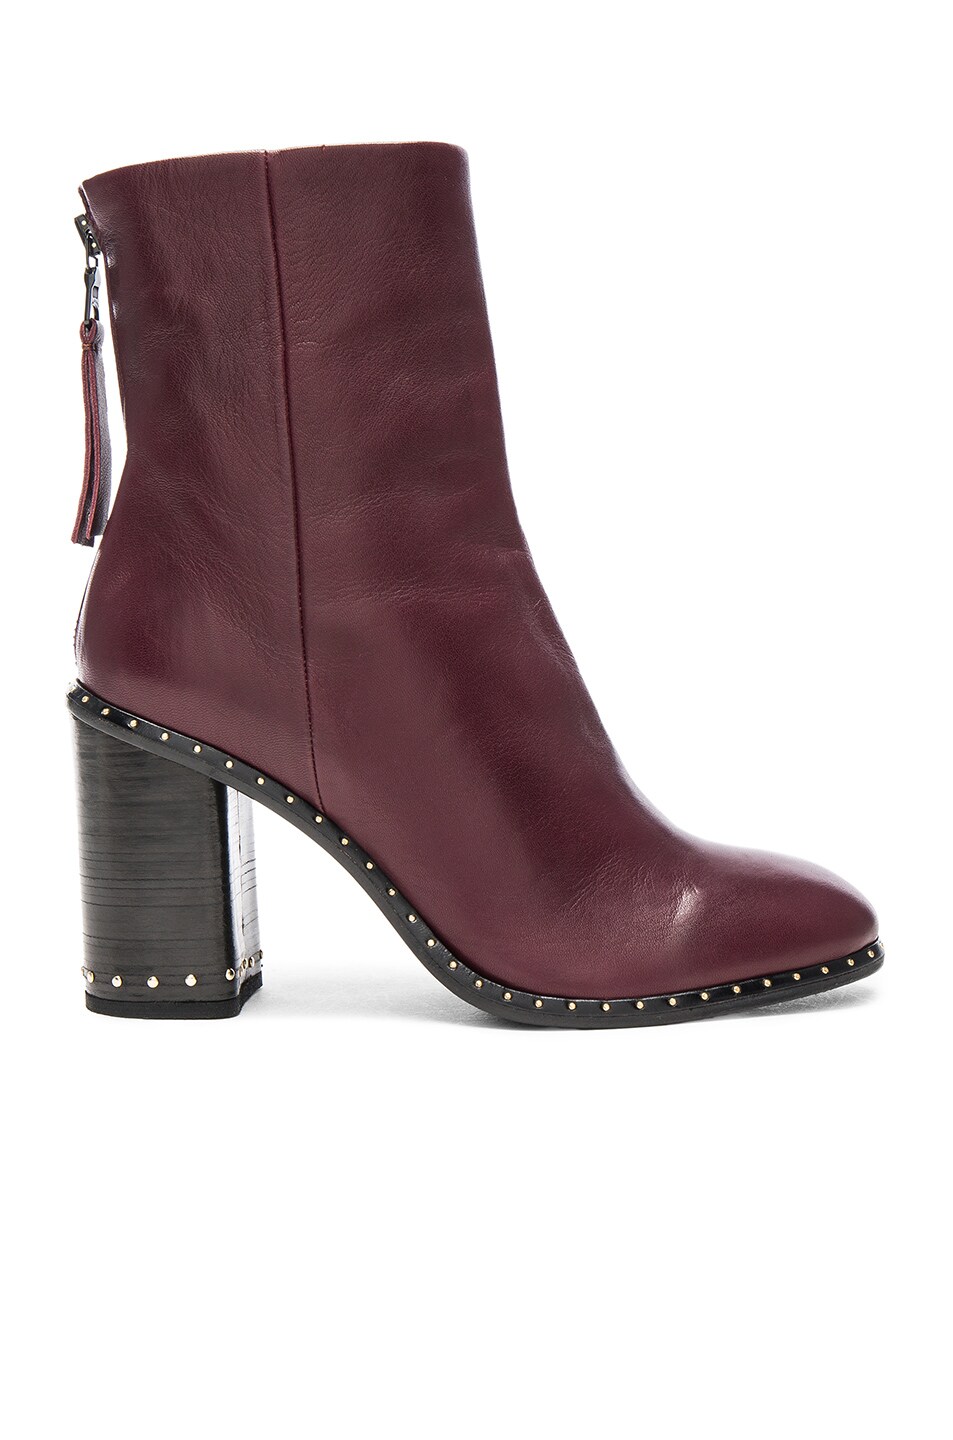 Image 1 of Rag & Bone Leather Blyth Boots in Bordeaux